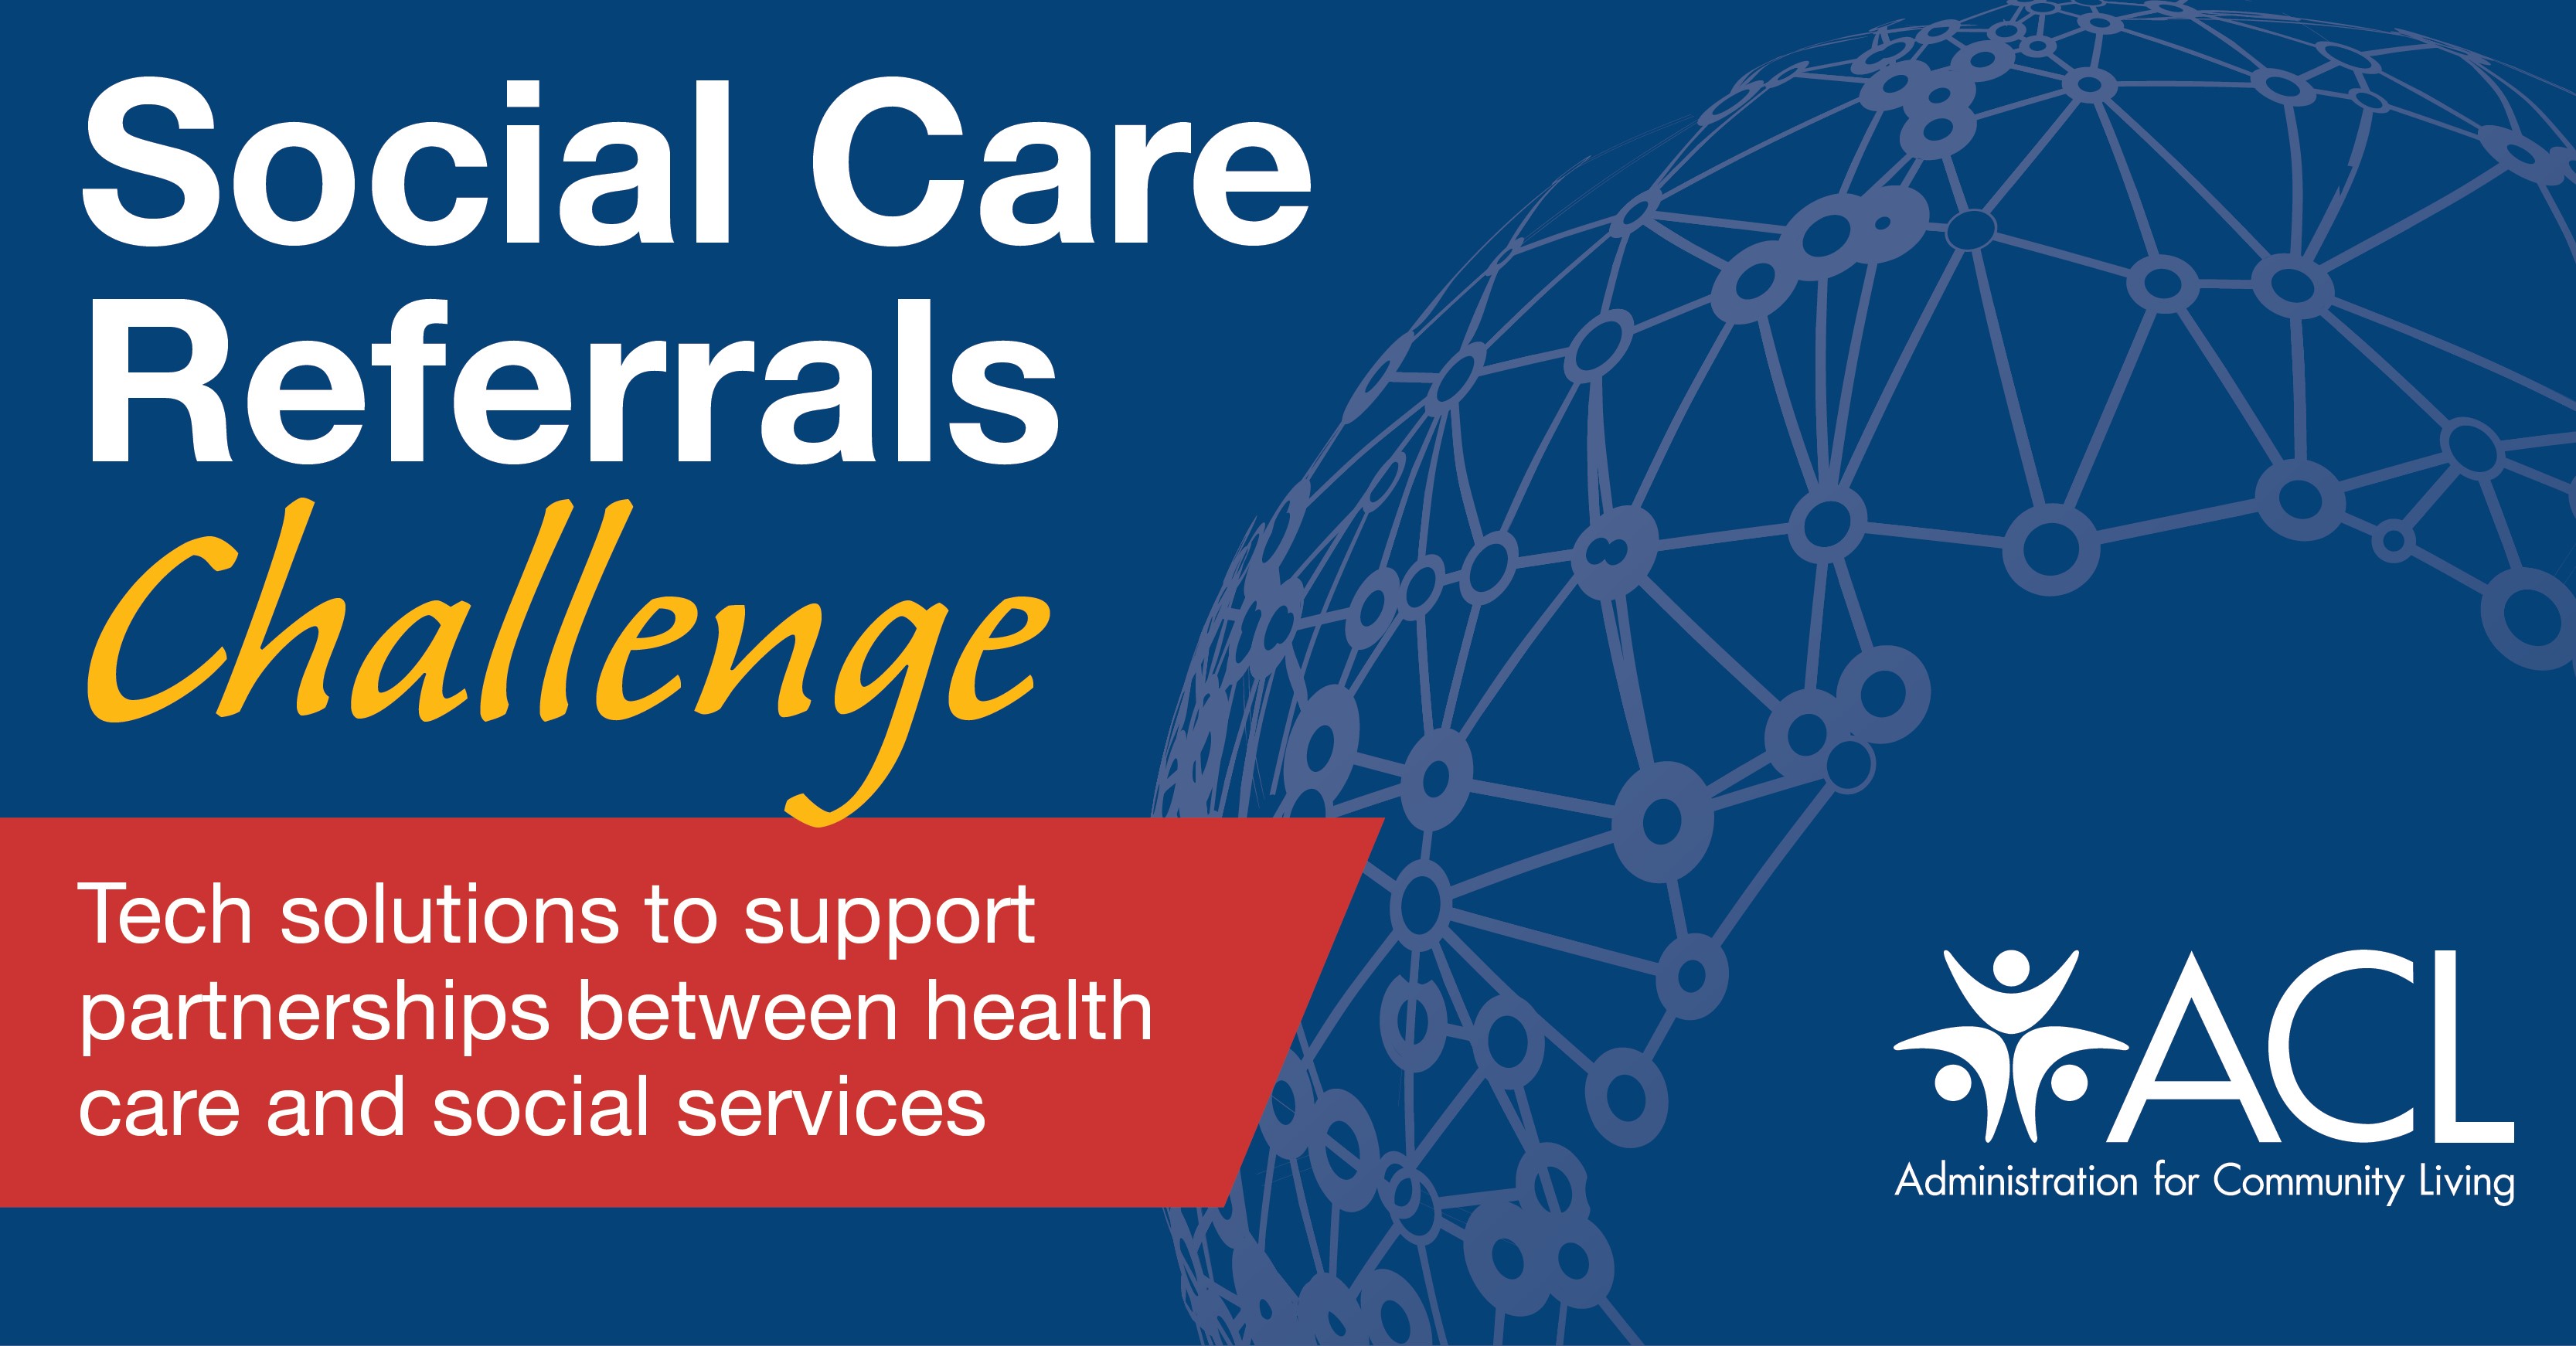 Social Care Referrals Challenge: Tech solutions to support partnerships between health care and social services